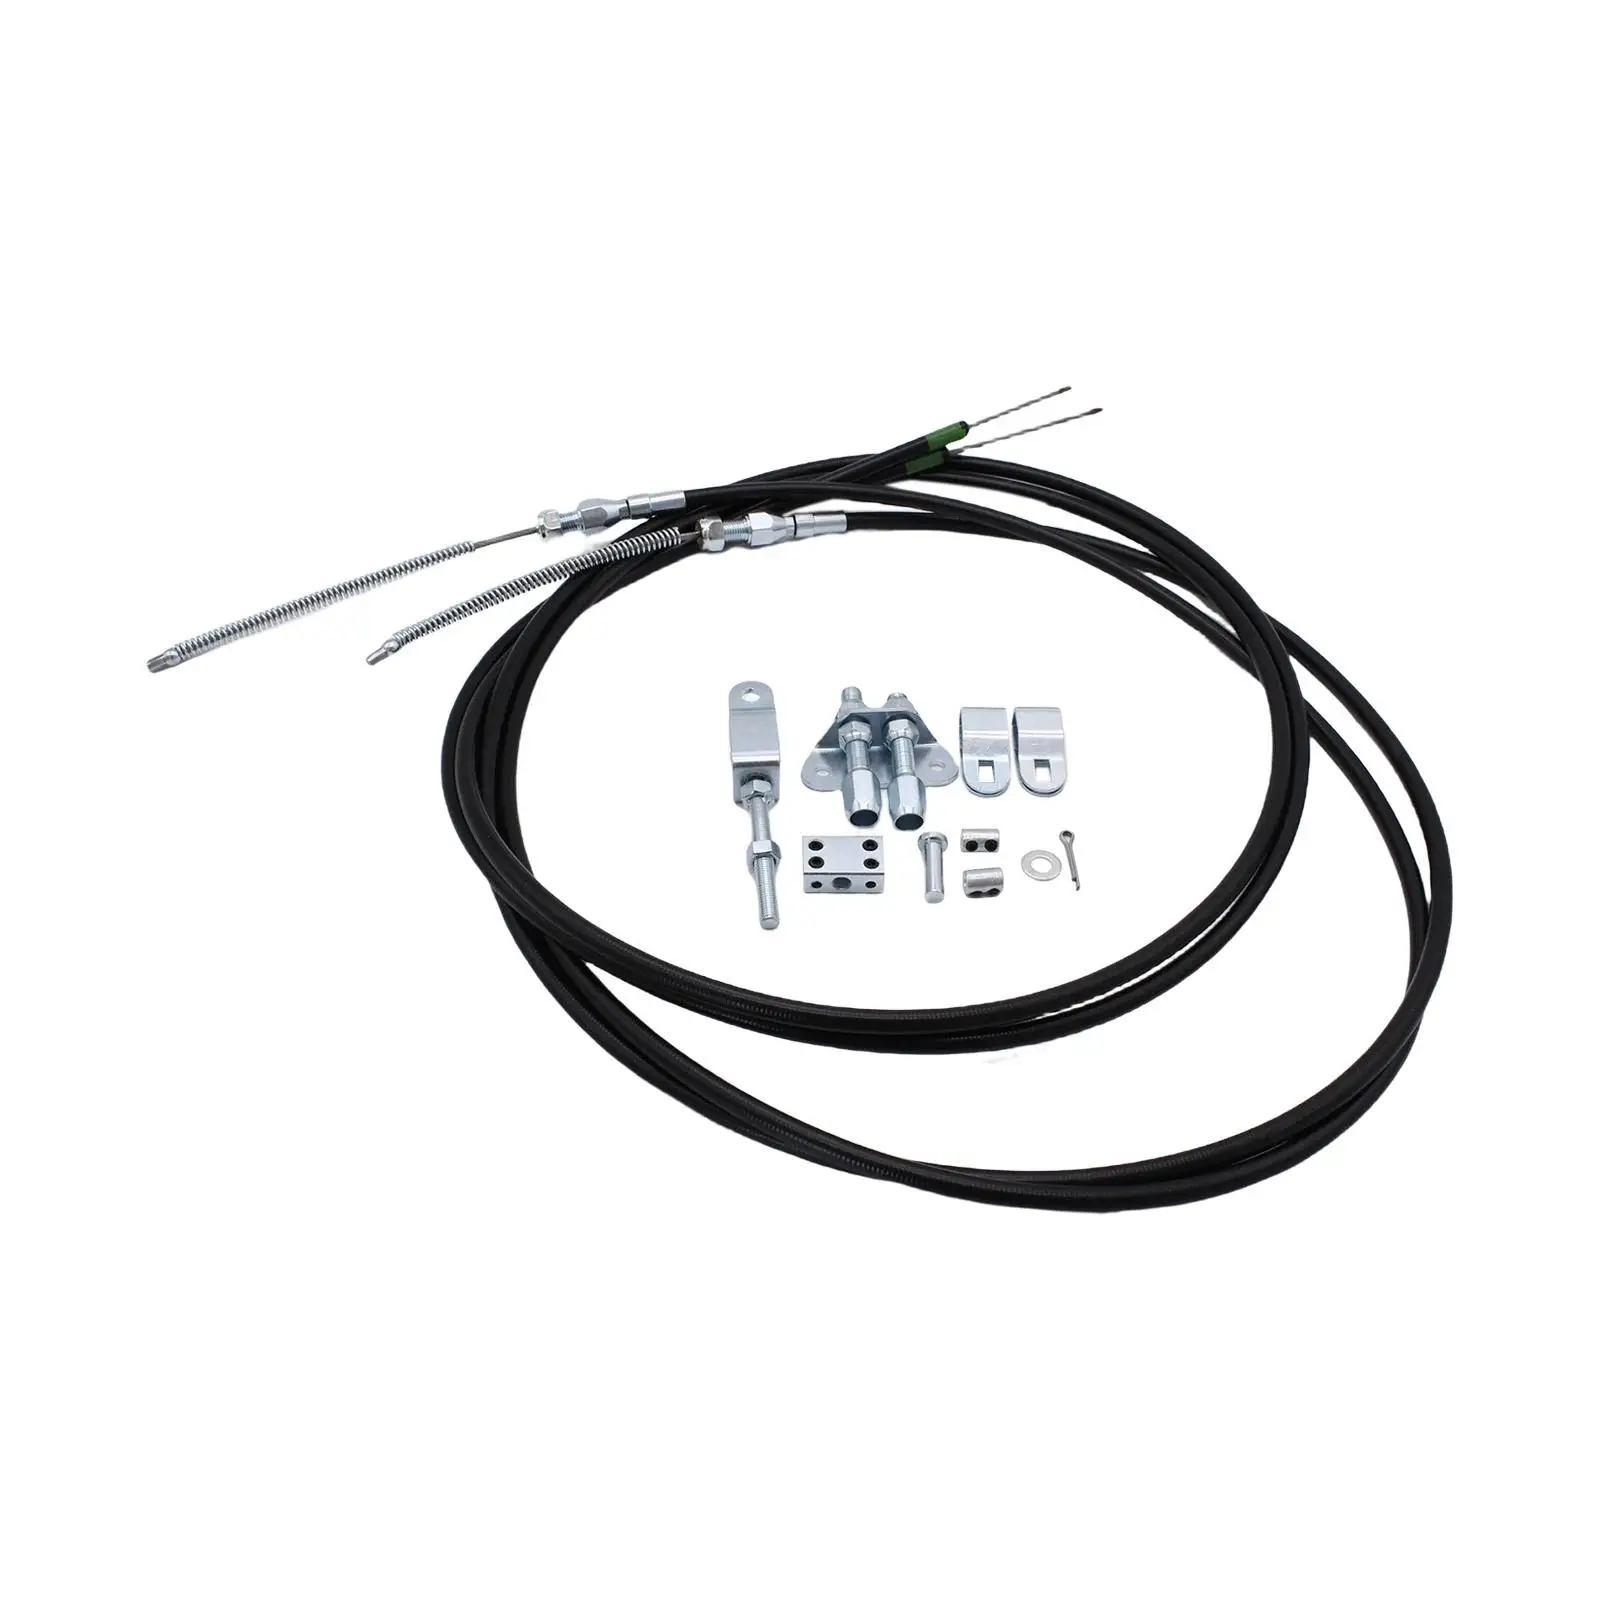 Automotive Emergency Parking Brake Cable Set 330-9371 Professional Accessory Include Installation Hardware Simple to Assemble